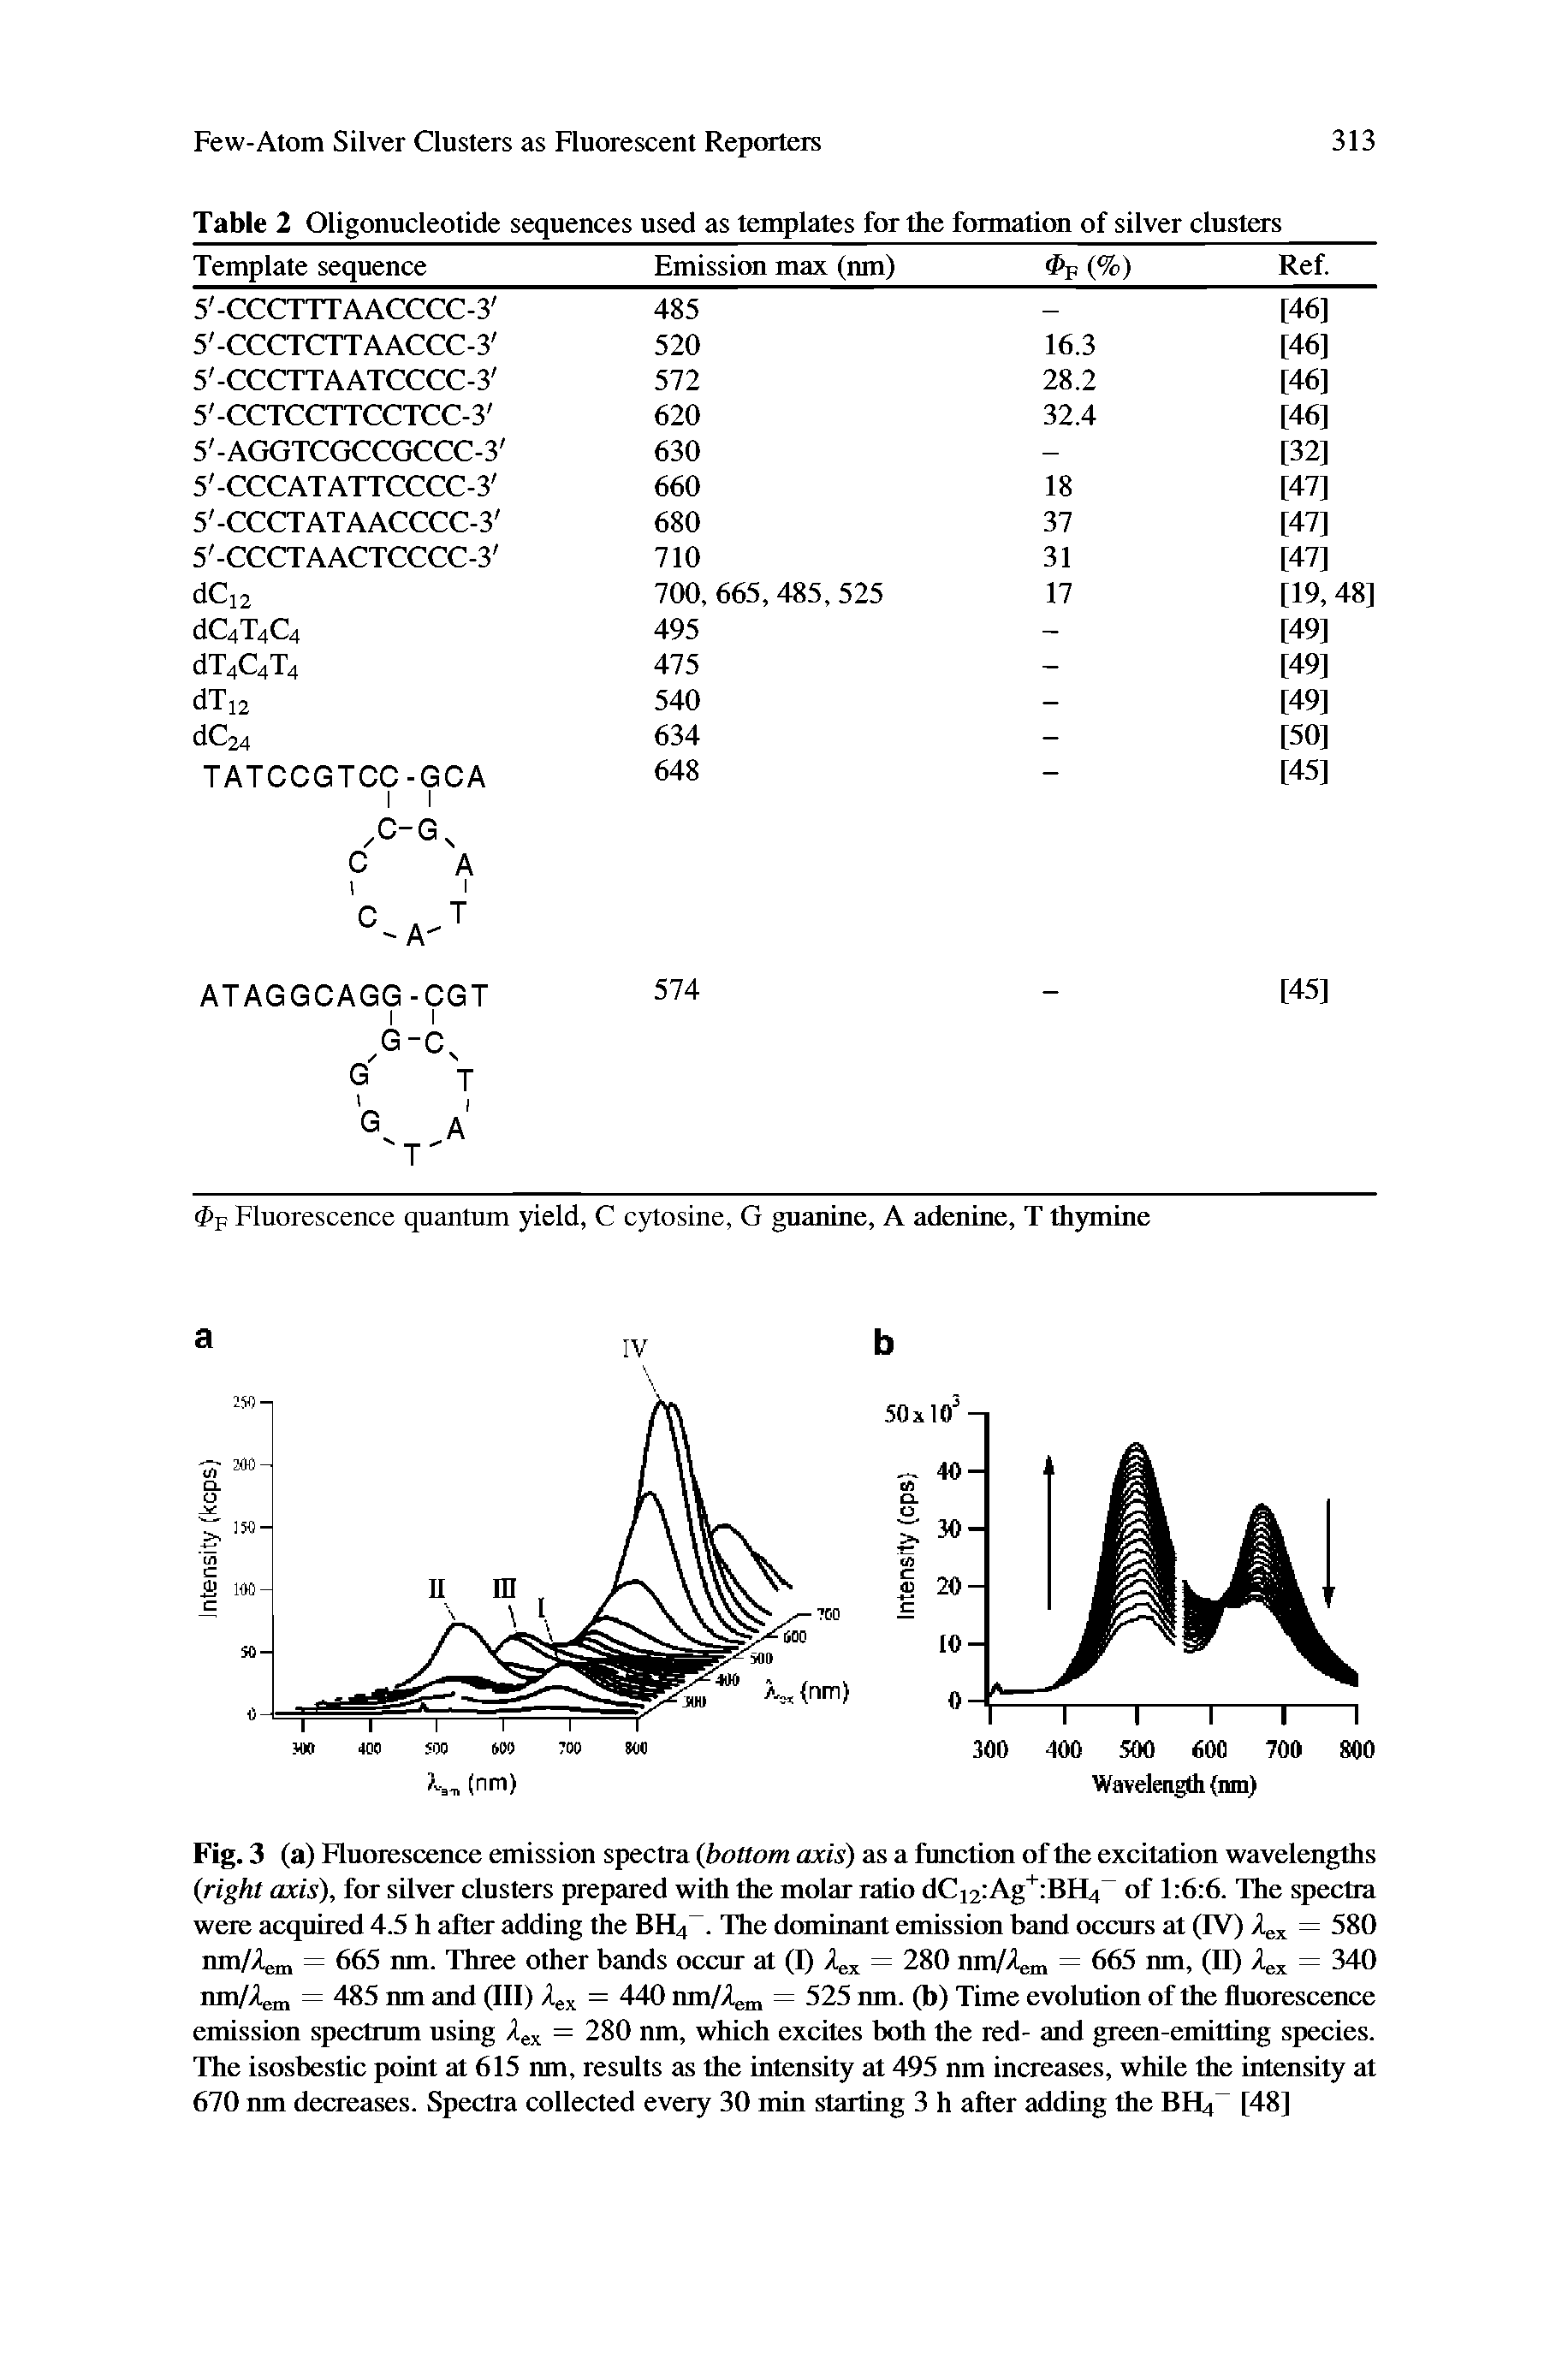 Table 2 Oligonucleotide sequences used as templates for the formation of silver clusters...